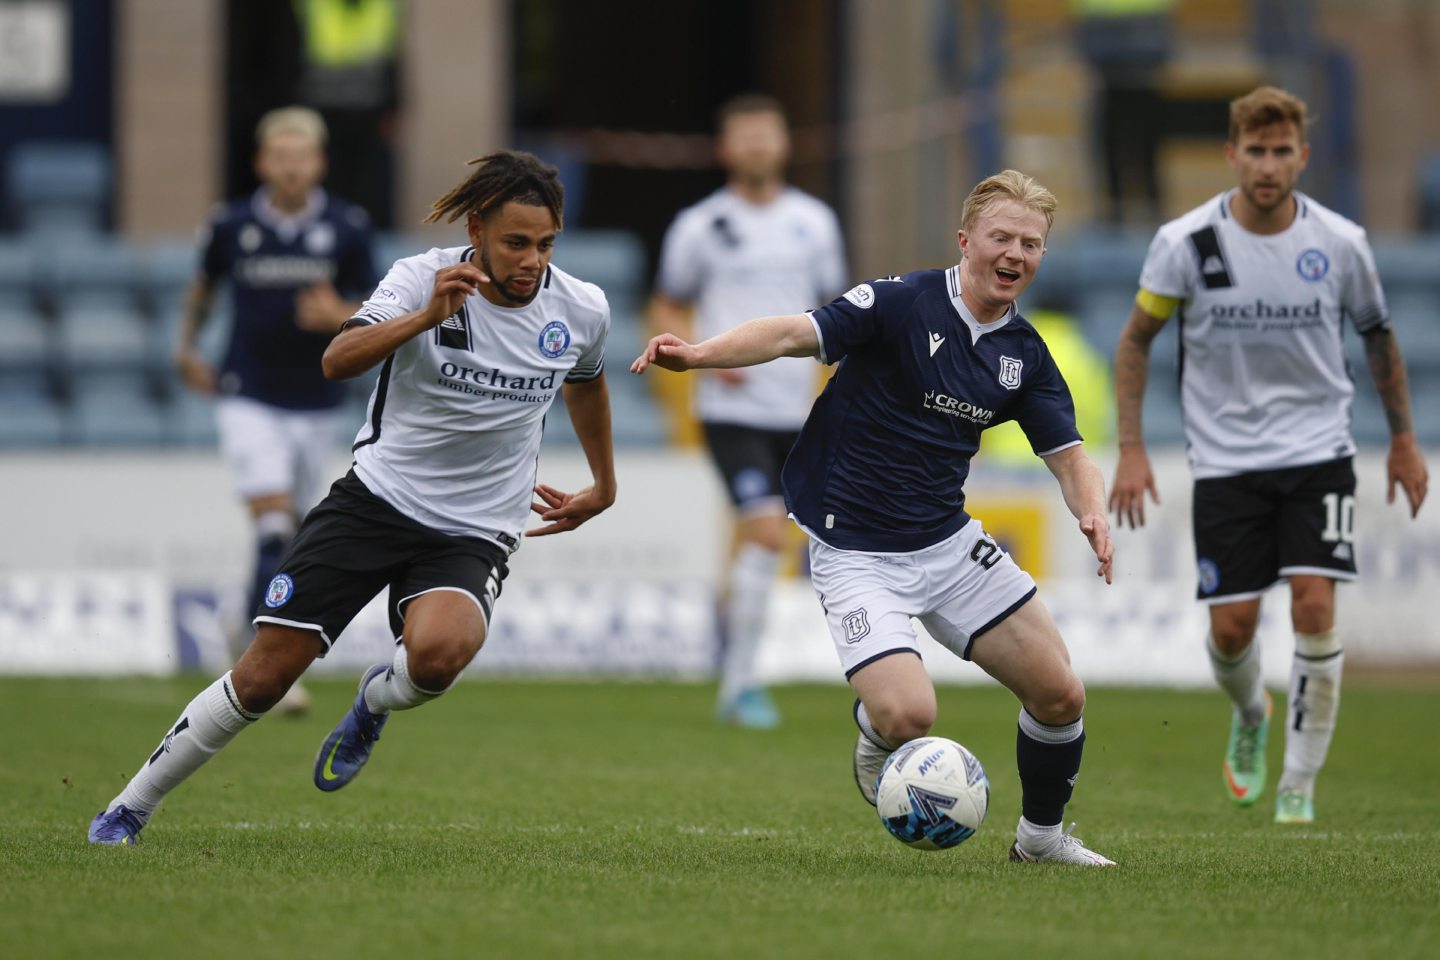 Forfar lost three of their four League Cup group matches, including a 5-1 defeat at Dundee. Image: David Young/Action Plus/Shutterstock